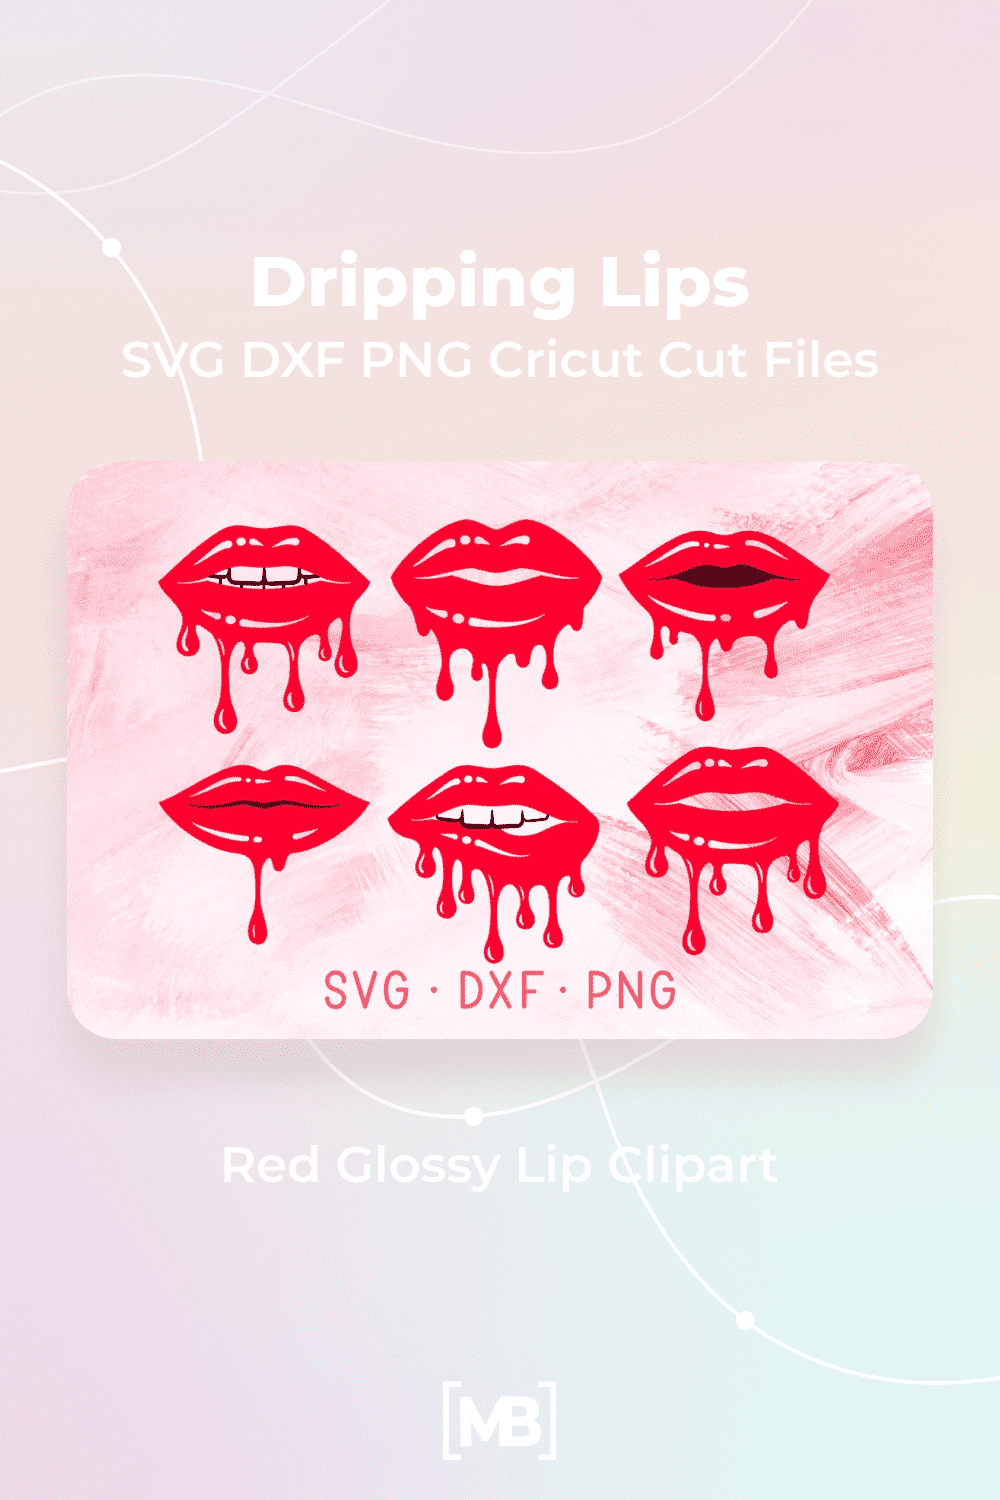 Dripping Lips SVG DXF PNG Cricut Cut Files, Red Glossy Lip Clipart.